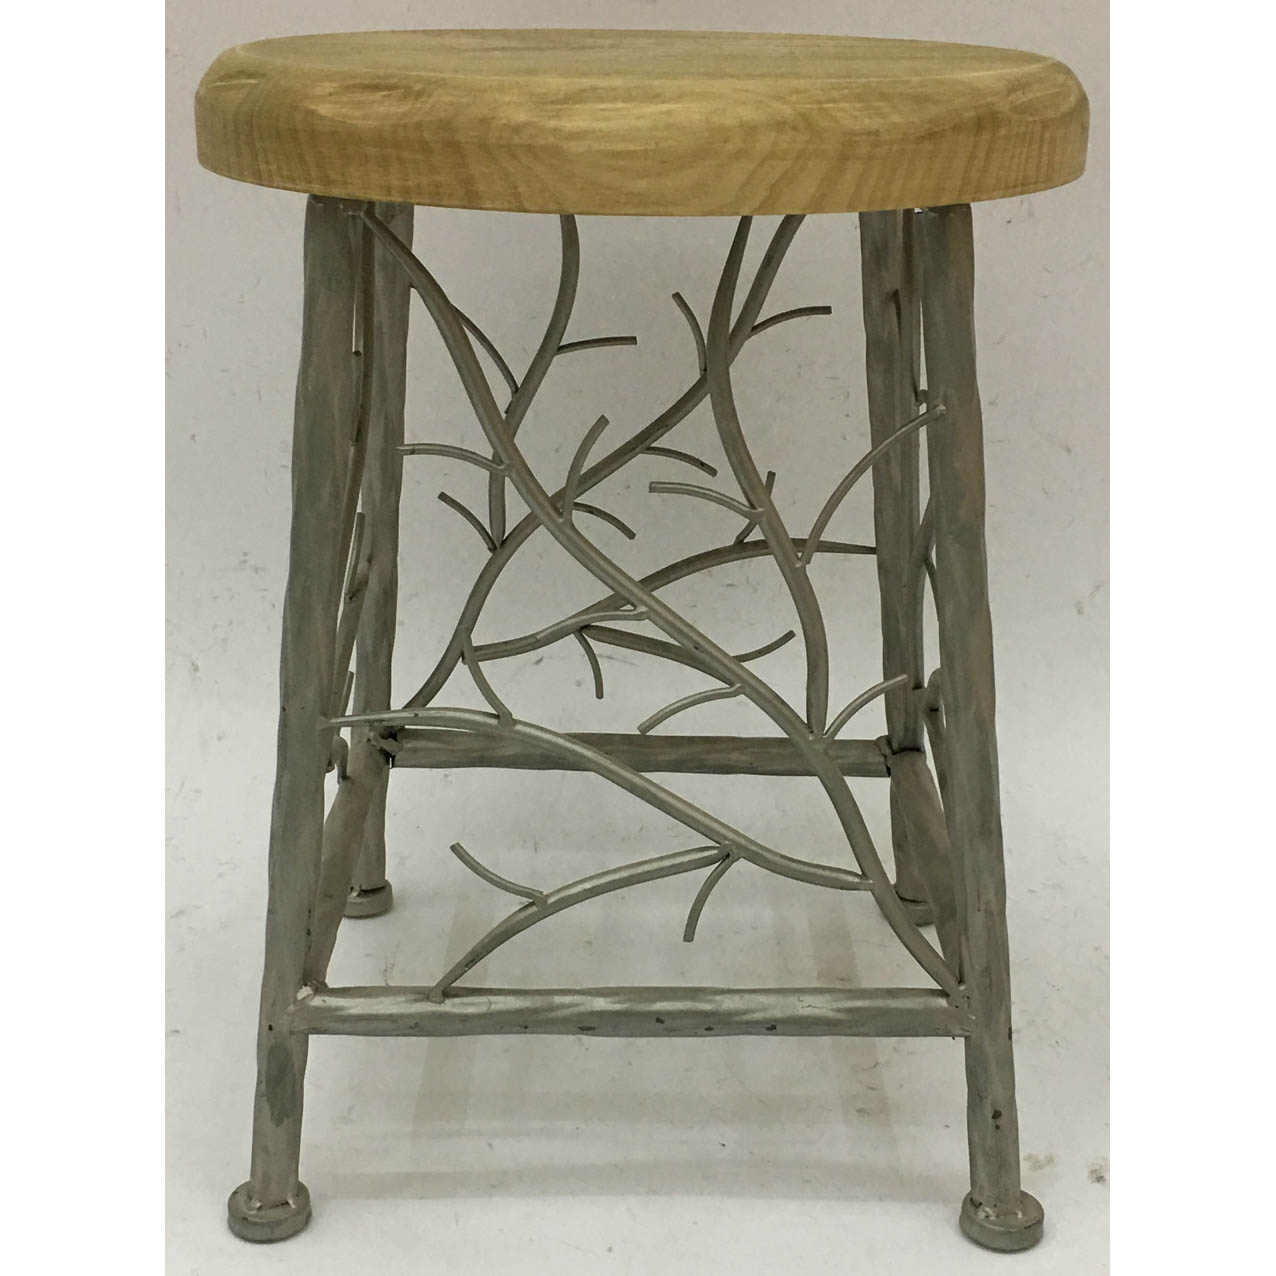 Round metal side table with natural look solid wood and growing tree decor